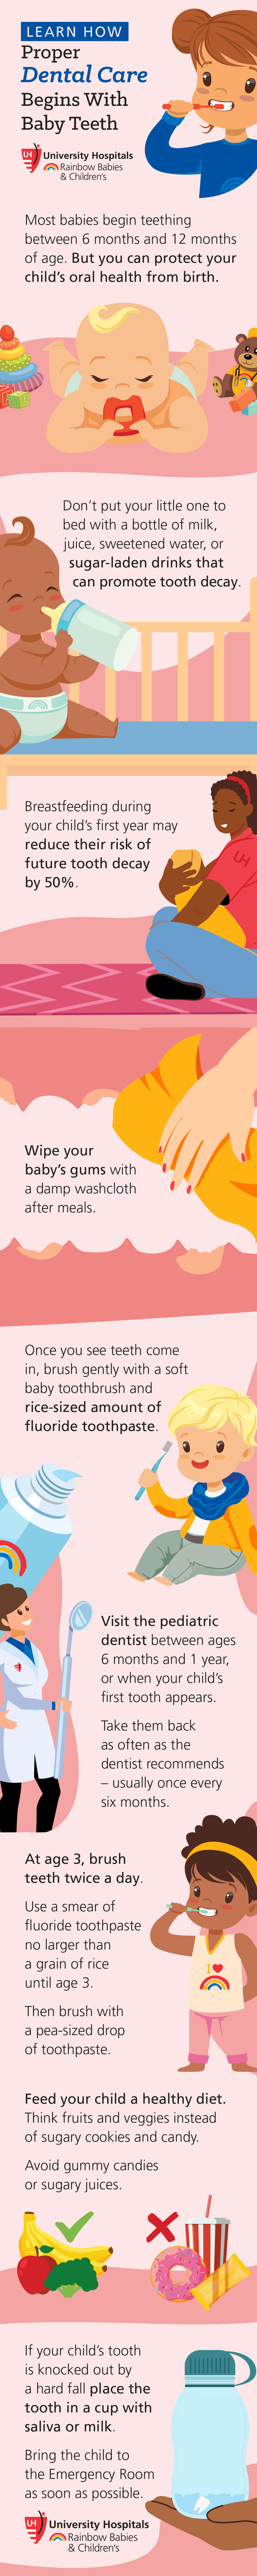 Infographic: Proper Dental Care Begins with Baby Teeth